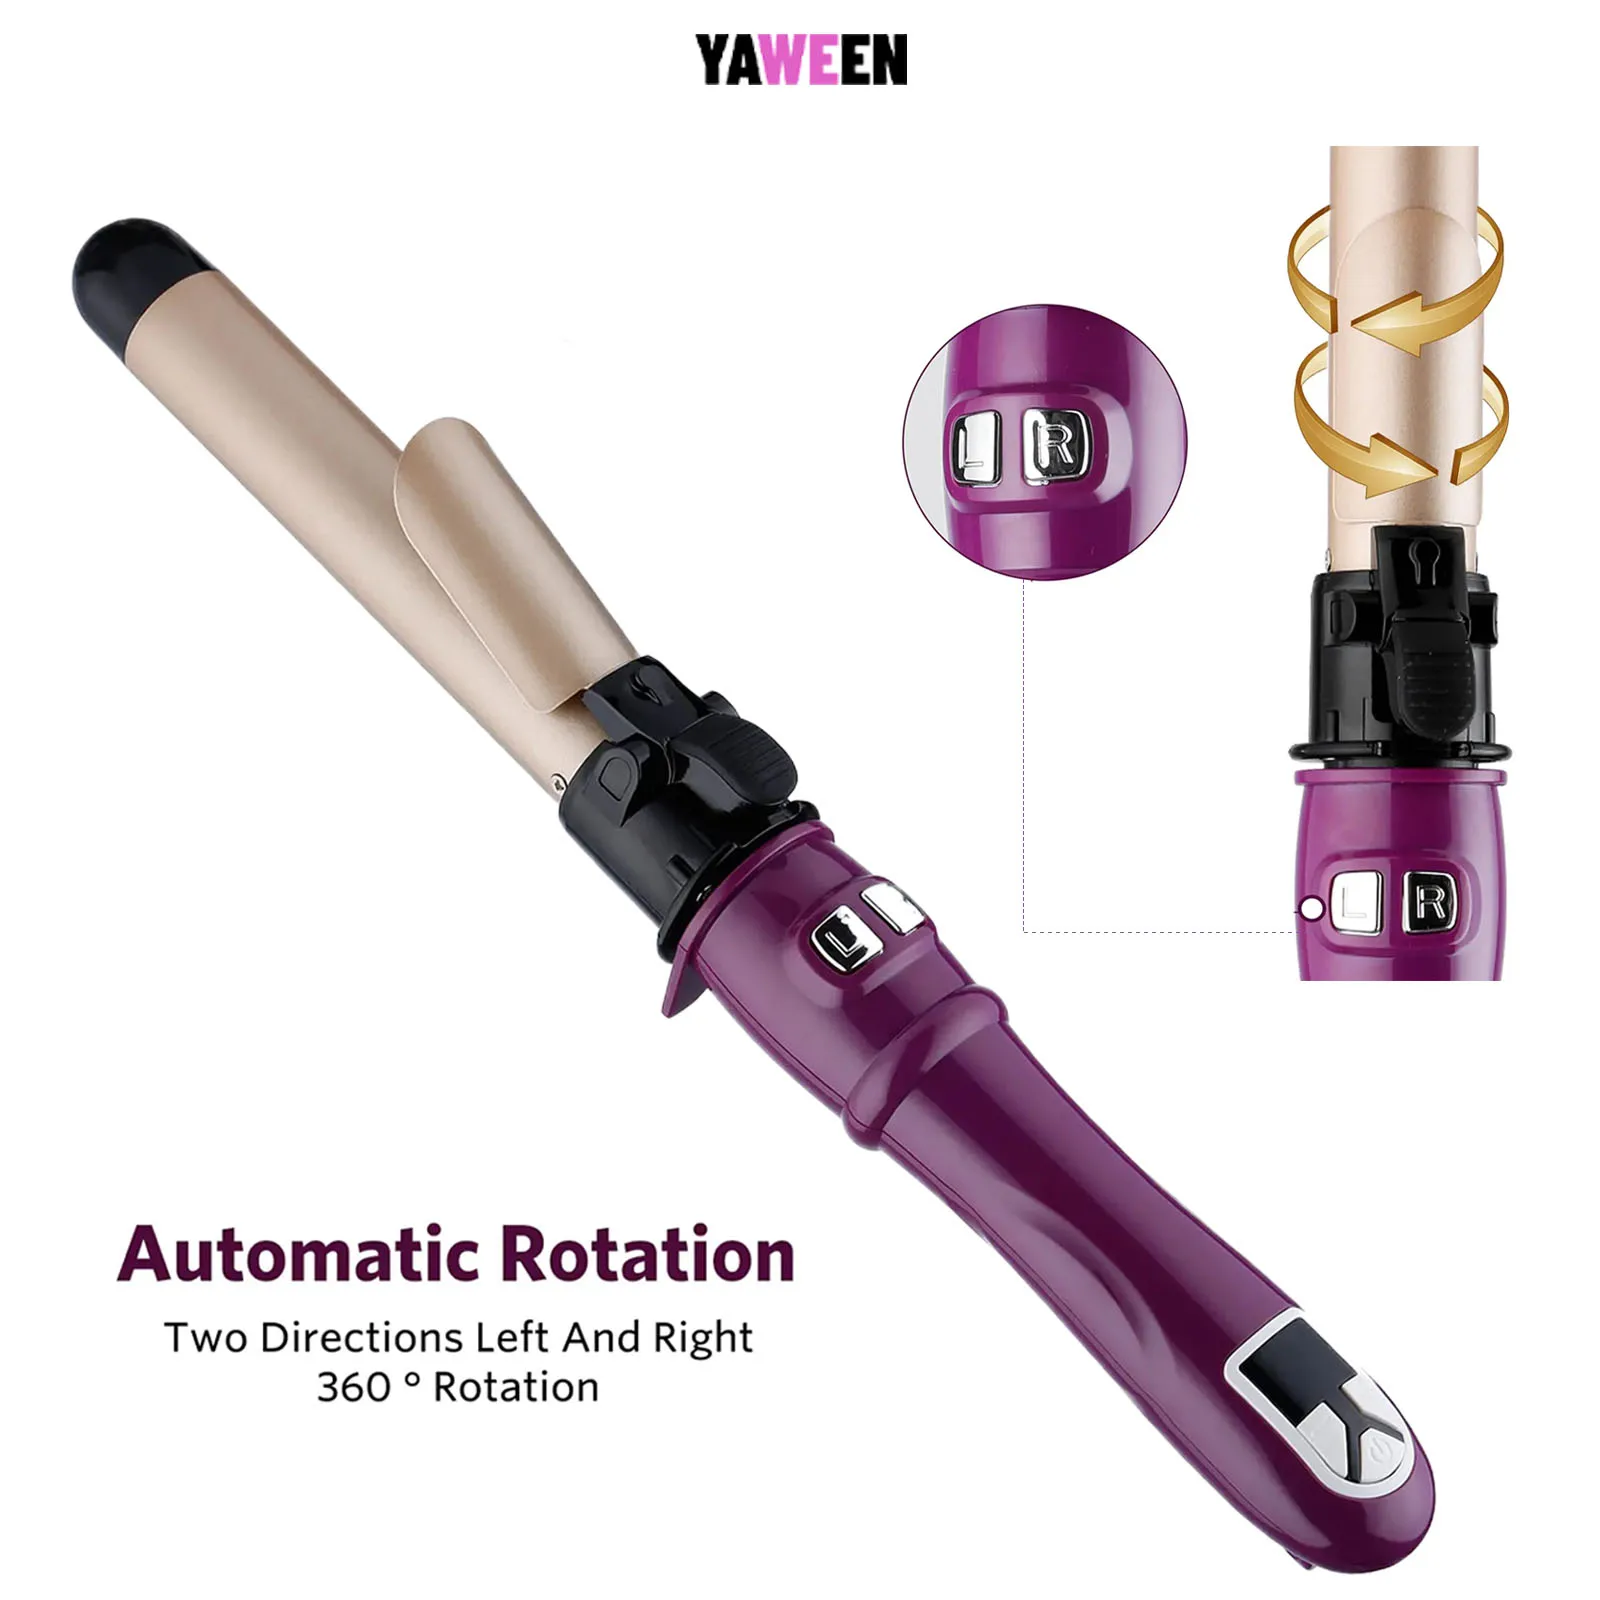 YAWEEN Automatic Rotation Curly Hair Rod With 360 DegreeTemperature Display Screen for 30s Instant Heating Rod for Anti Scalding